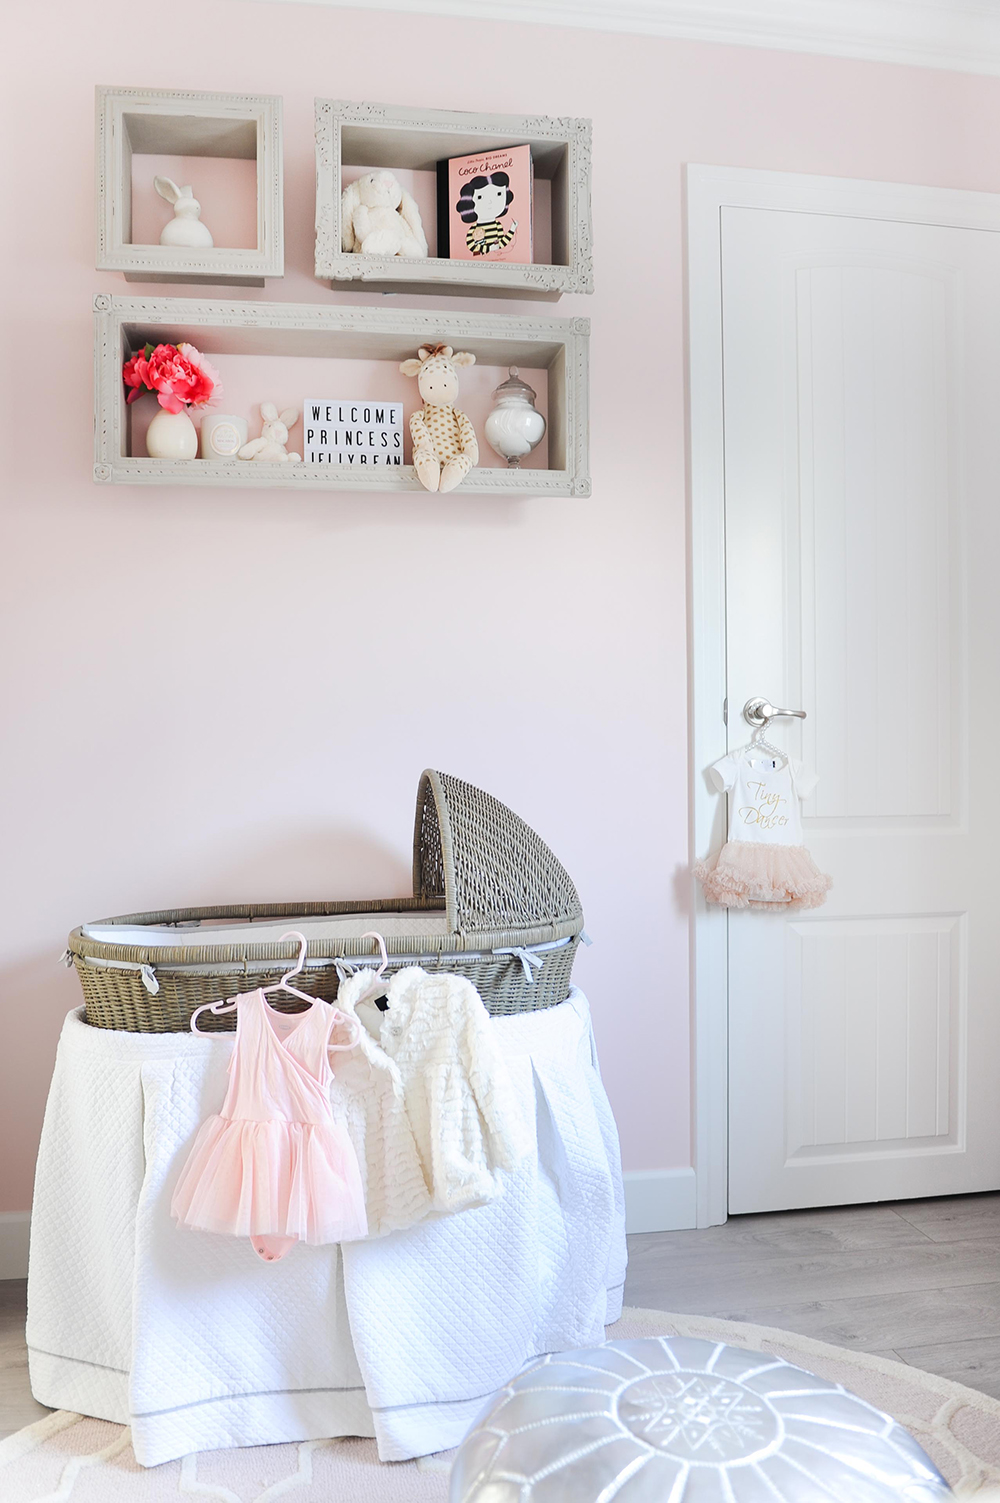 A vintage-look woven bassinet adds a dream-like quality to this sweet nursery.